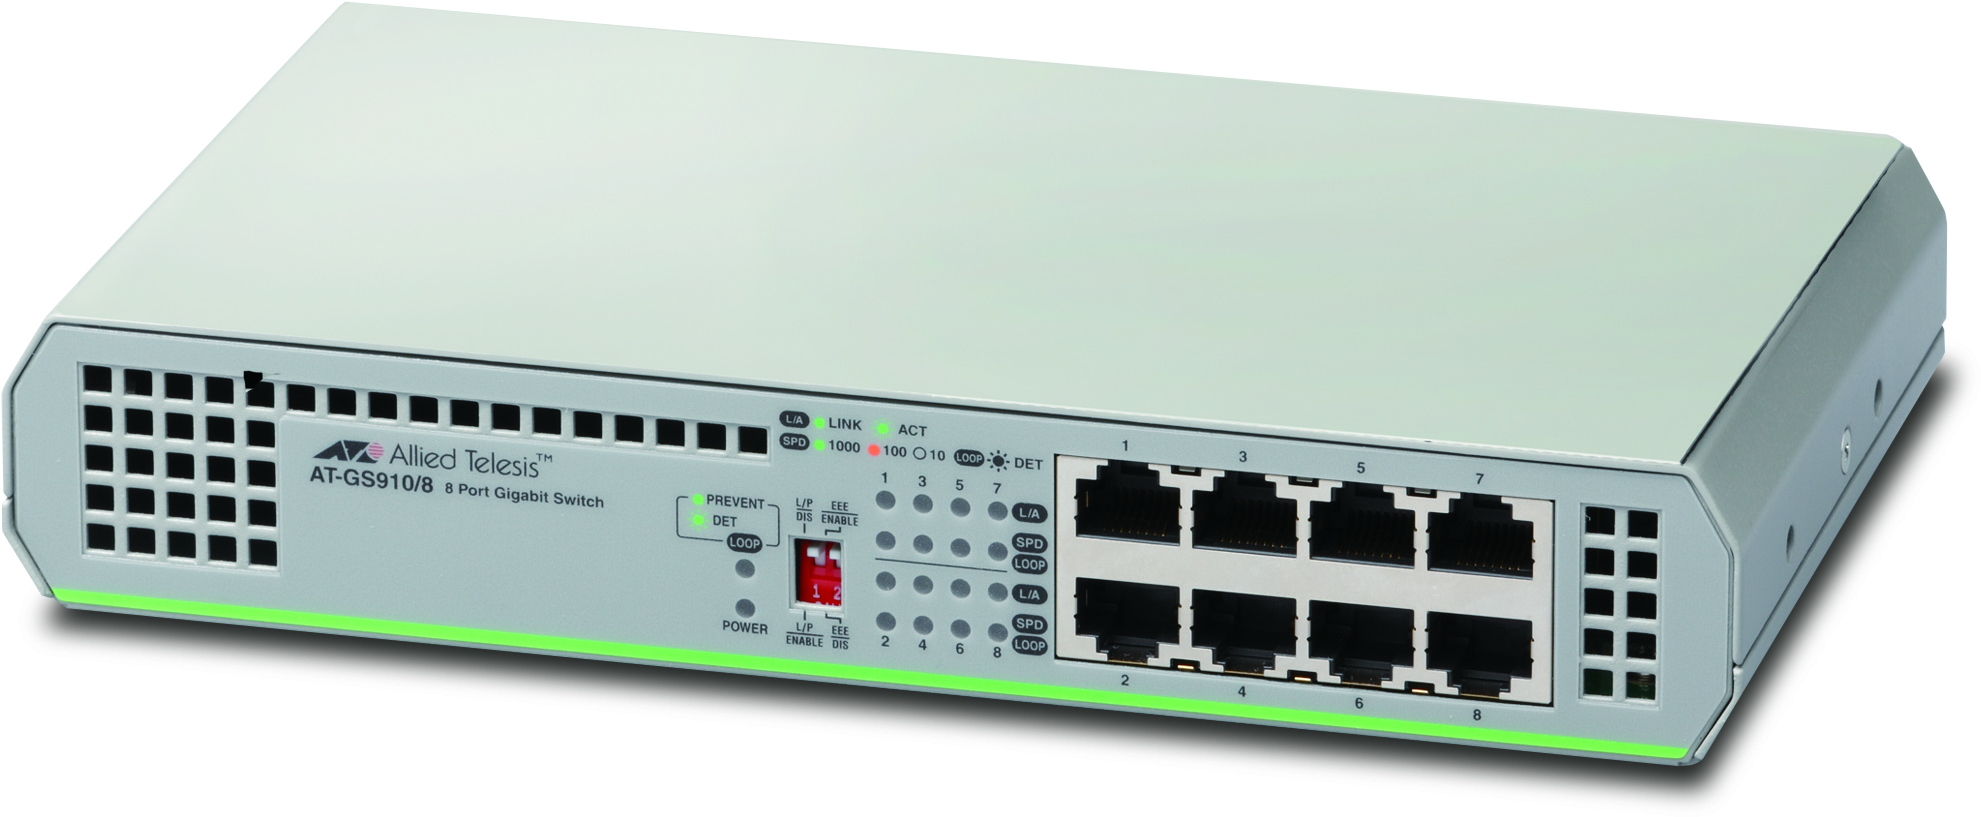 Allied Telesis AT-GS910/8E Switch